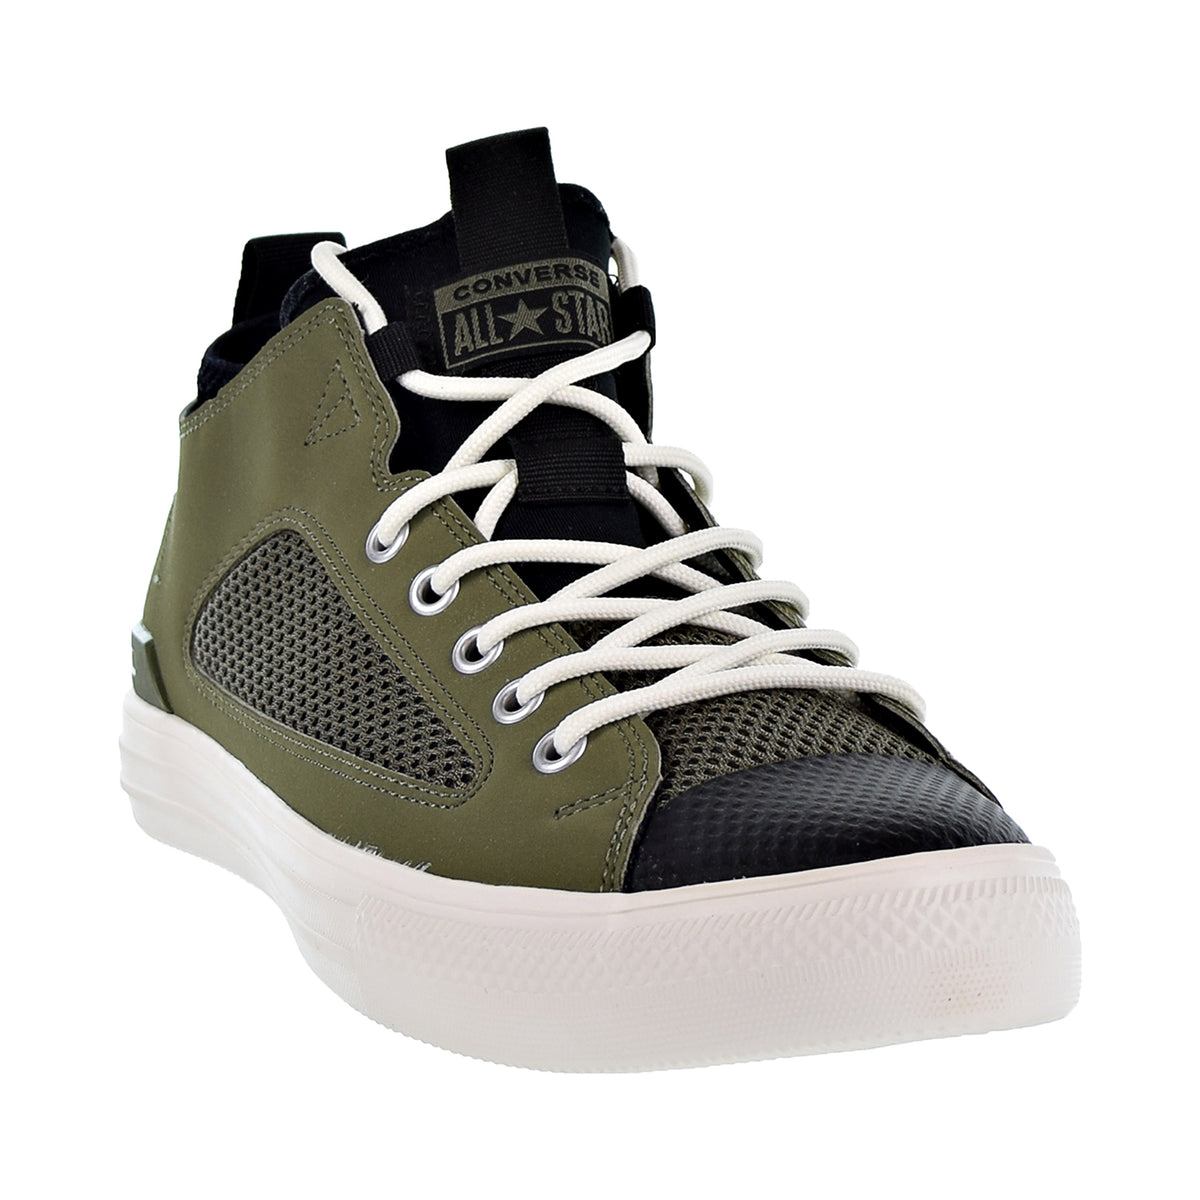 Converse Chuck Taylor All Star Ultra Ox Unisex Shoes Field Surplus